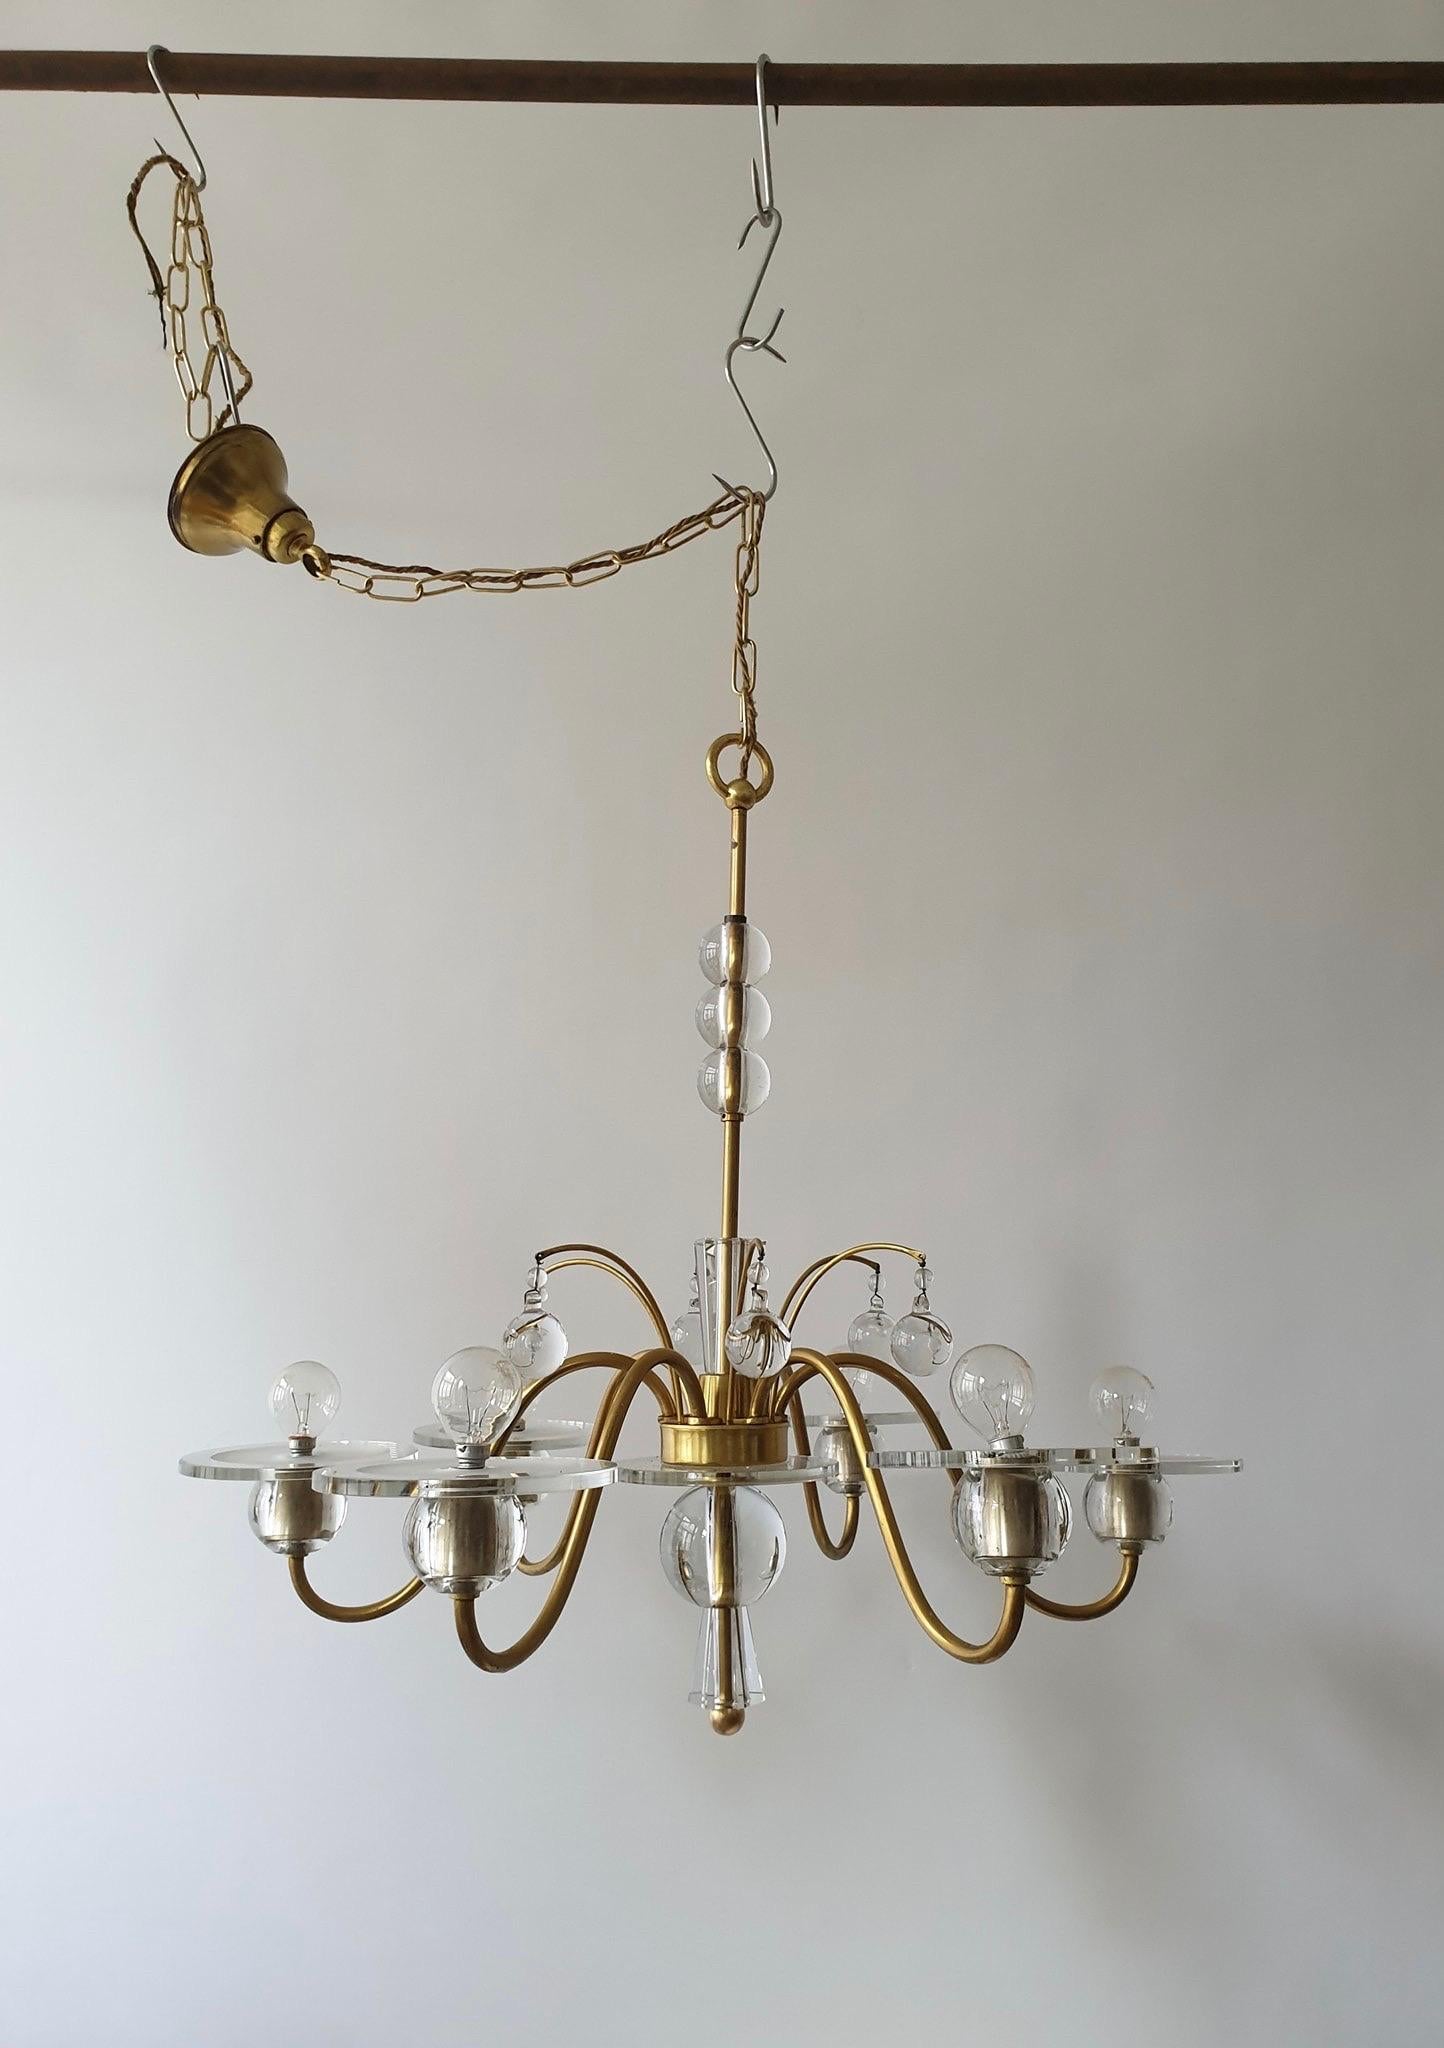 Art Deco glass and brass chandelier.
Measures: Diameter 70 cm.
Height fixture 67 cm.
Total height including the chain 130 cm.